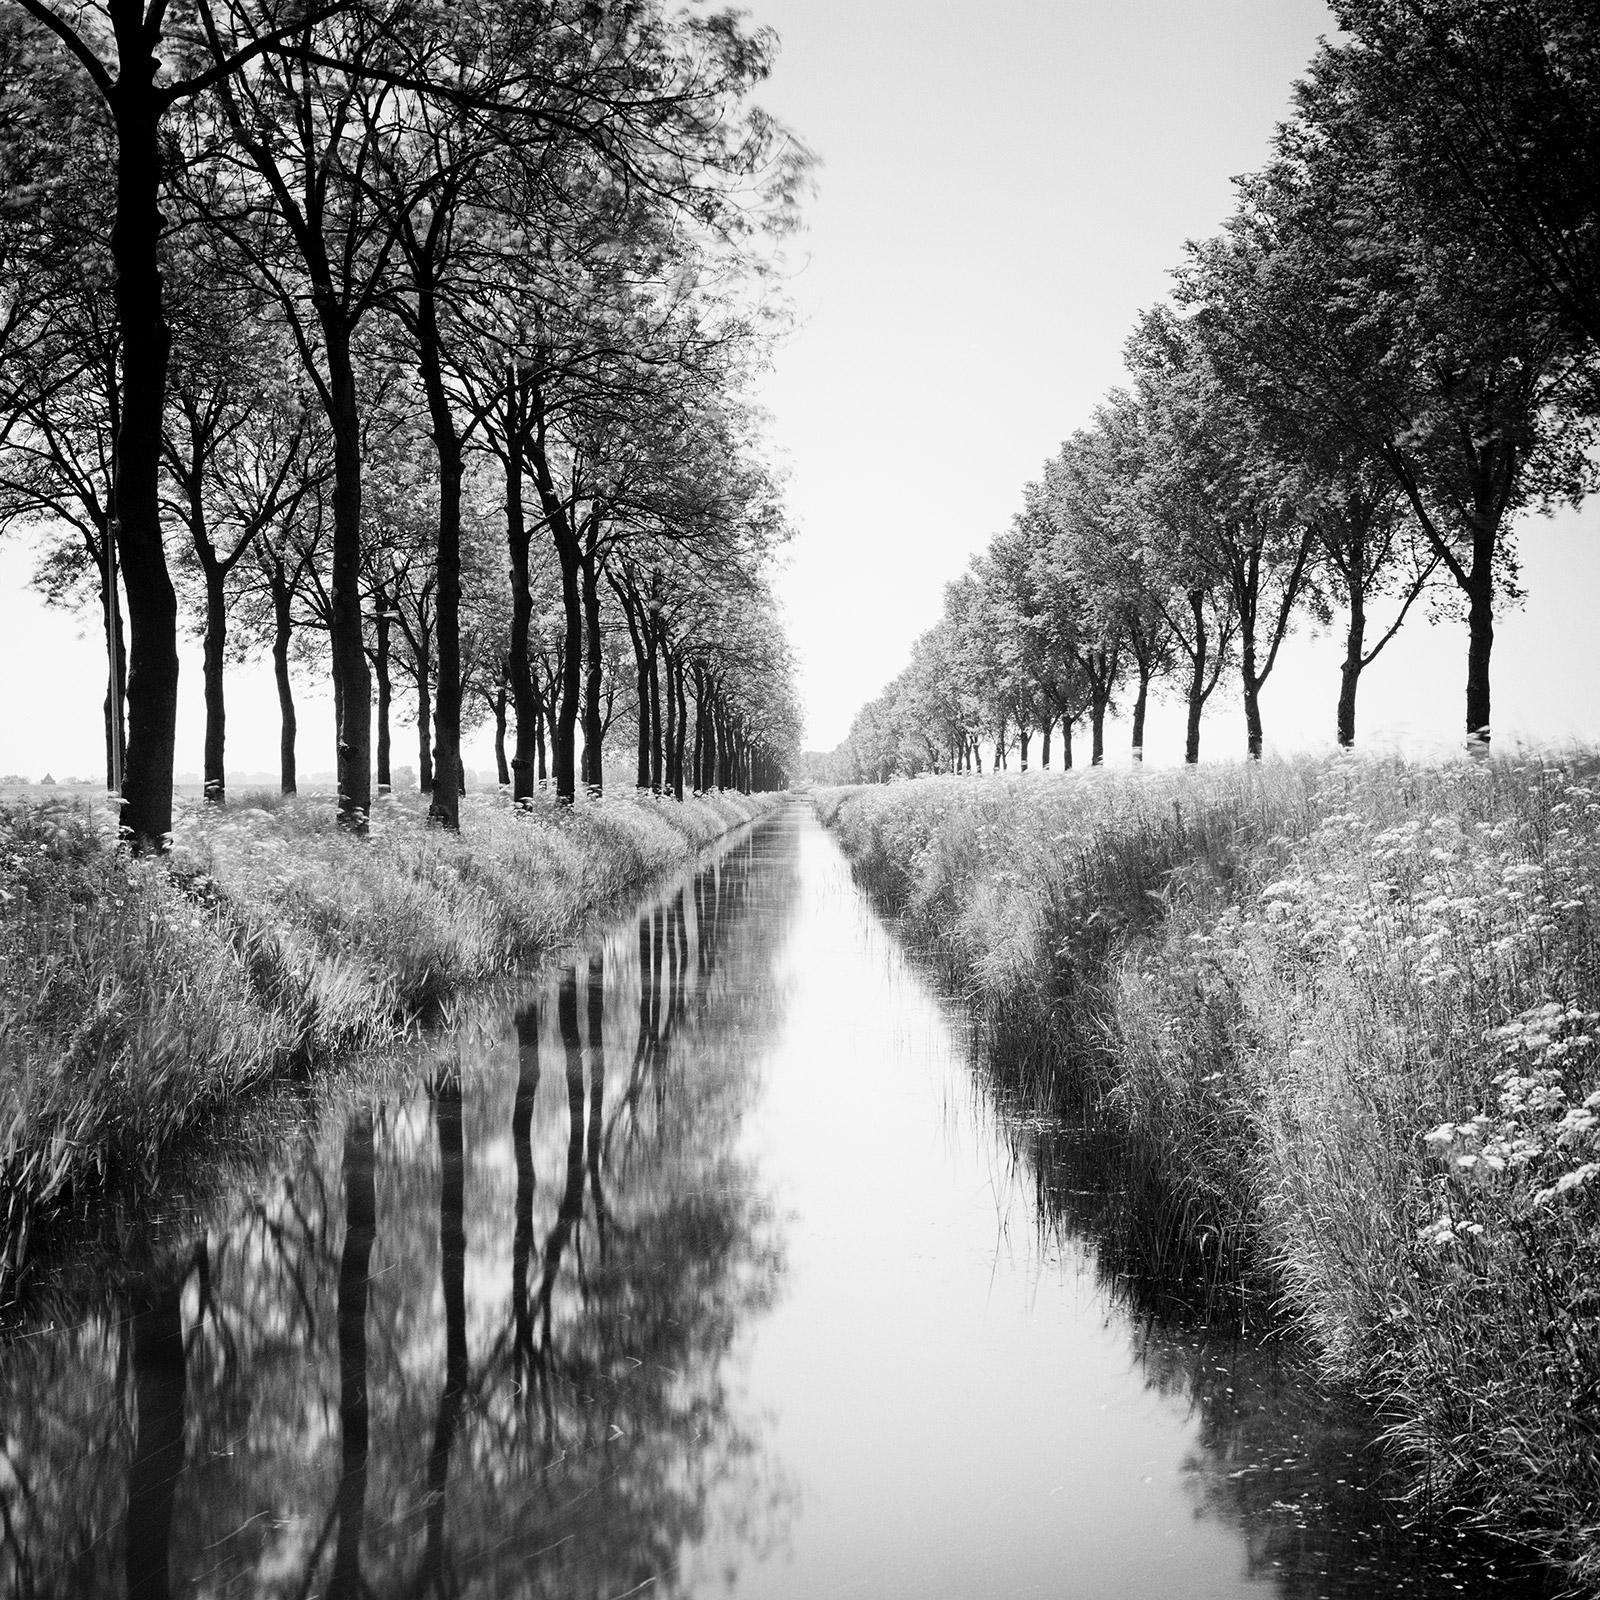 Gerald Berghammer Black and White Photograph - Gracht, tree avenue, water reflection, black and white long exposure photography